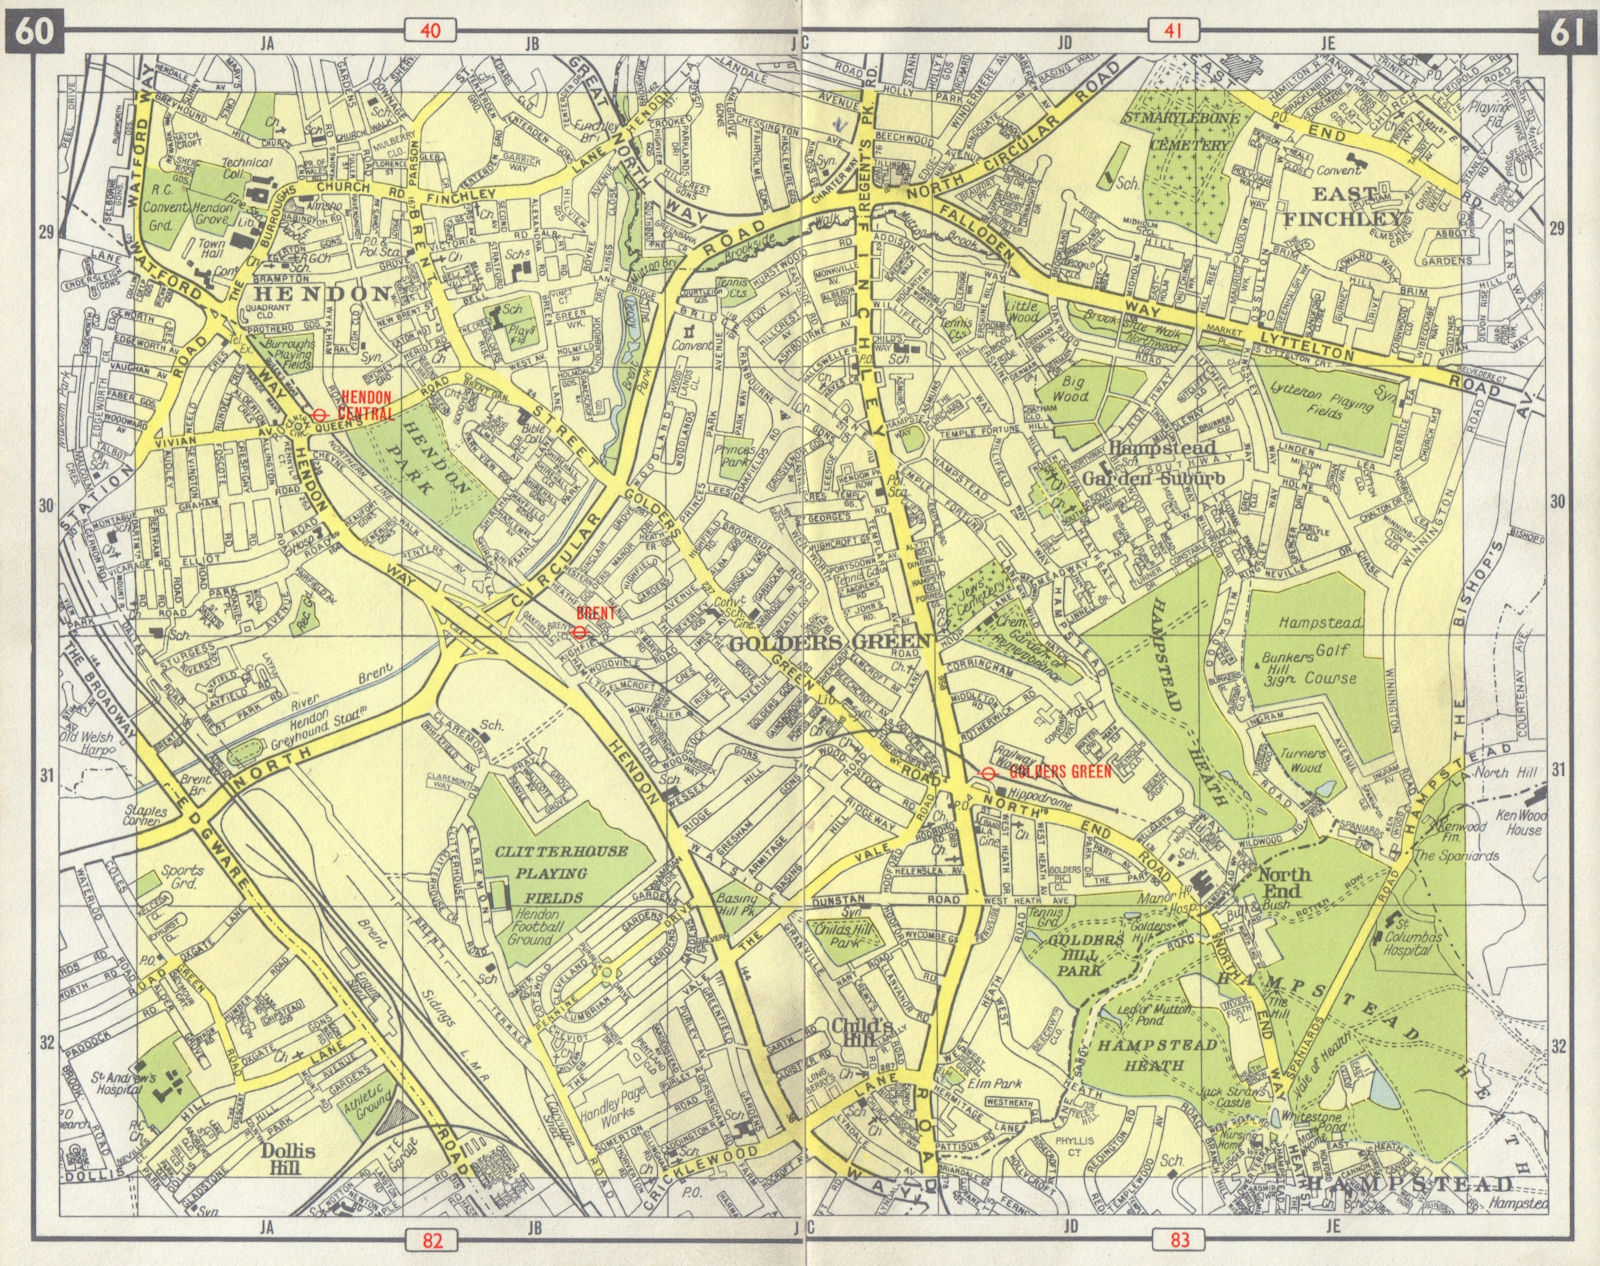 NW LONDON Hendon East Finchley Golders Green Child's Hill M1 projected 1965 map